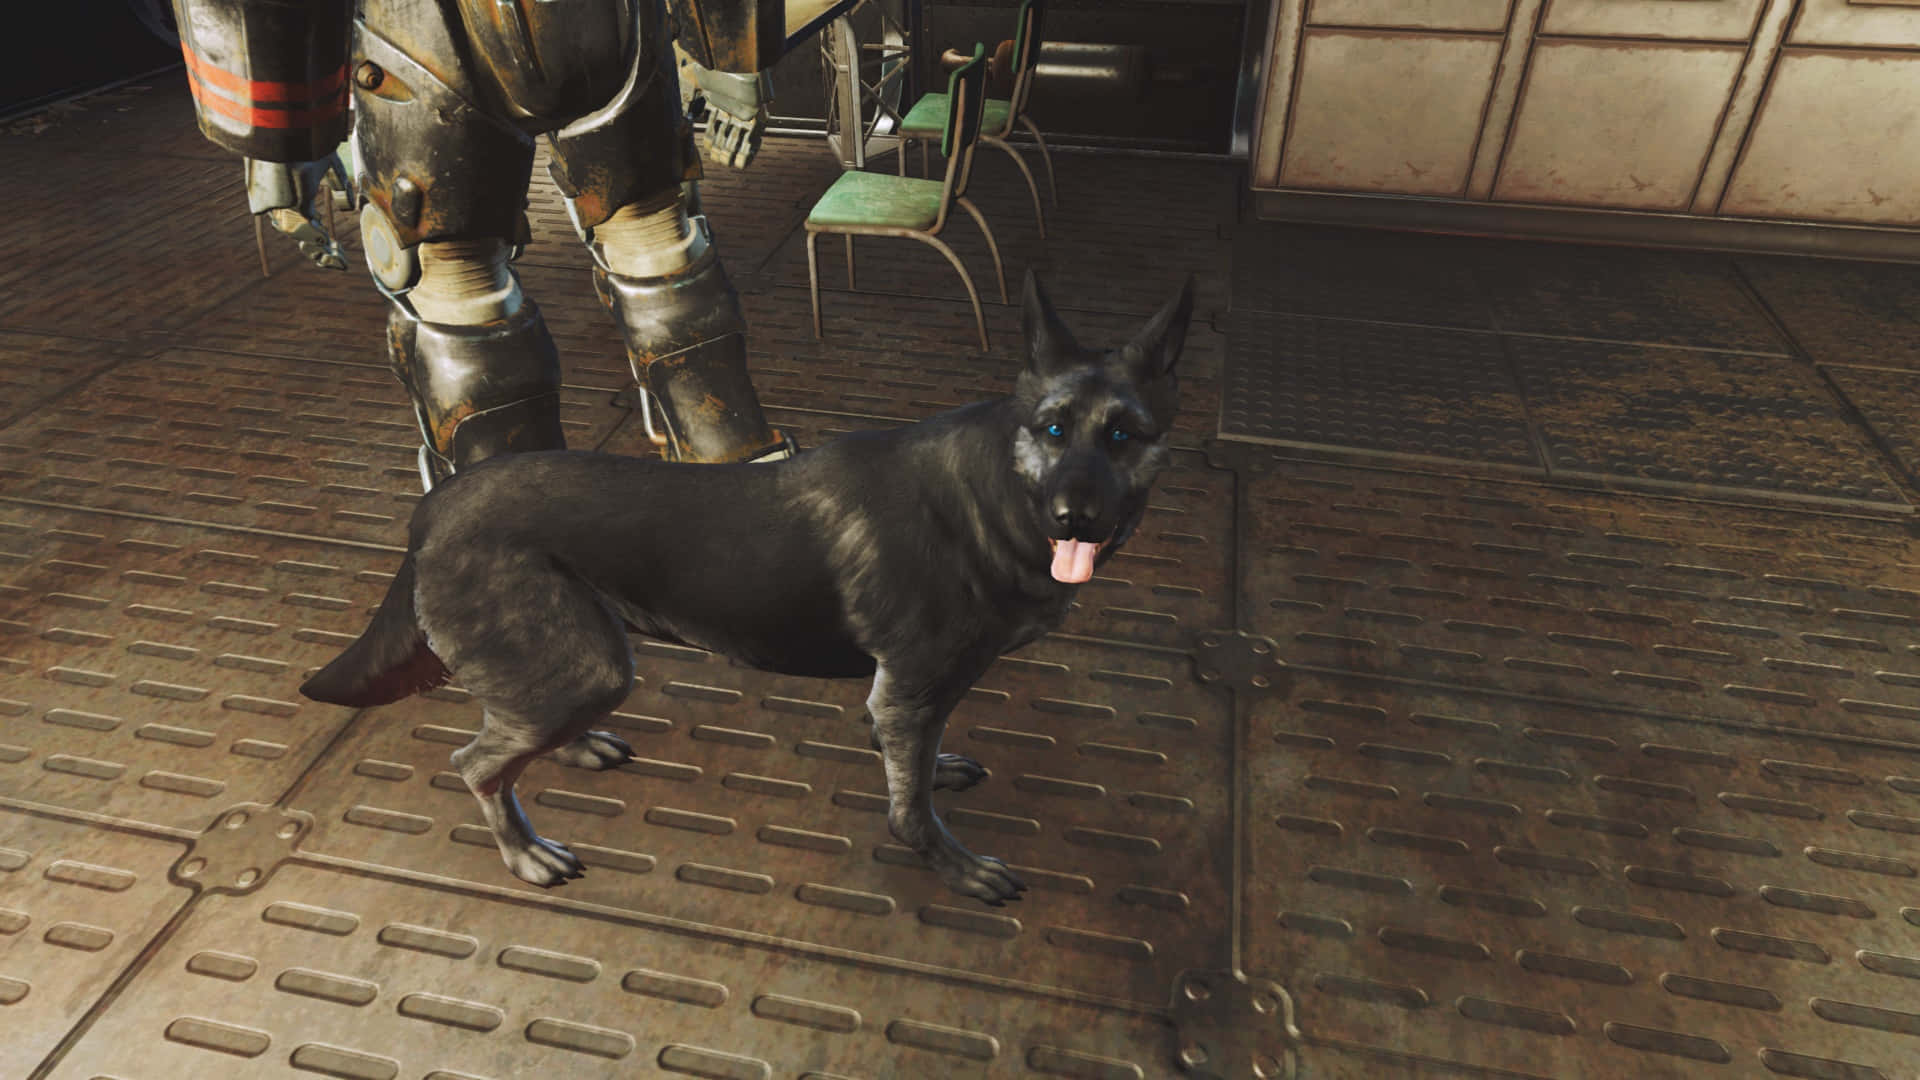 Fallout 4 Dogmeat: The canine companion you can rely on Wallpaper